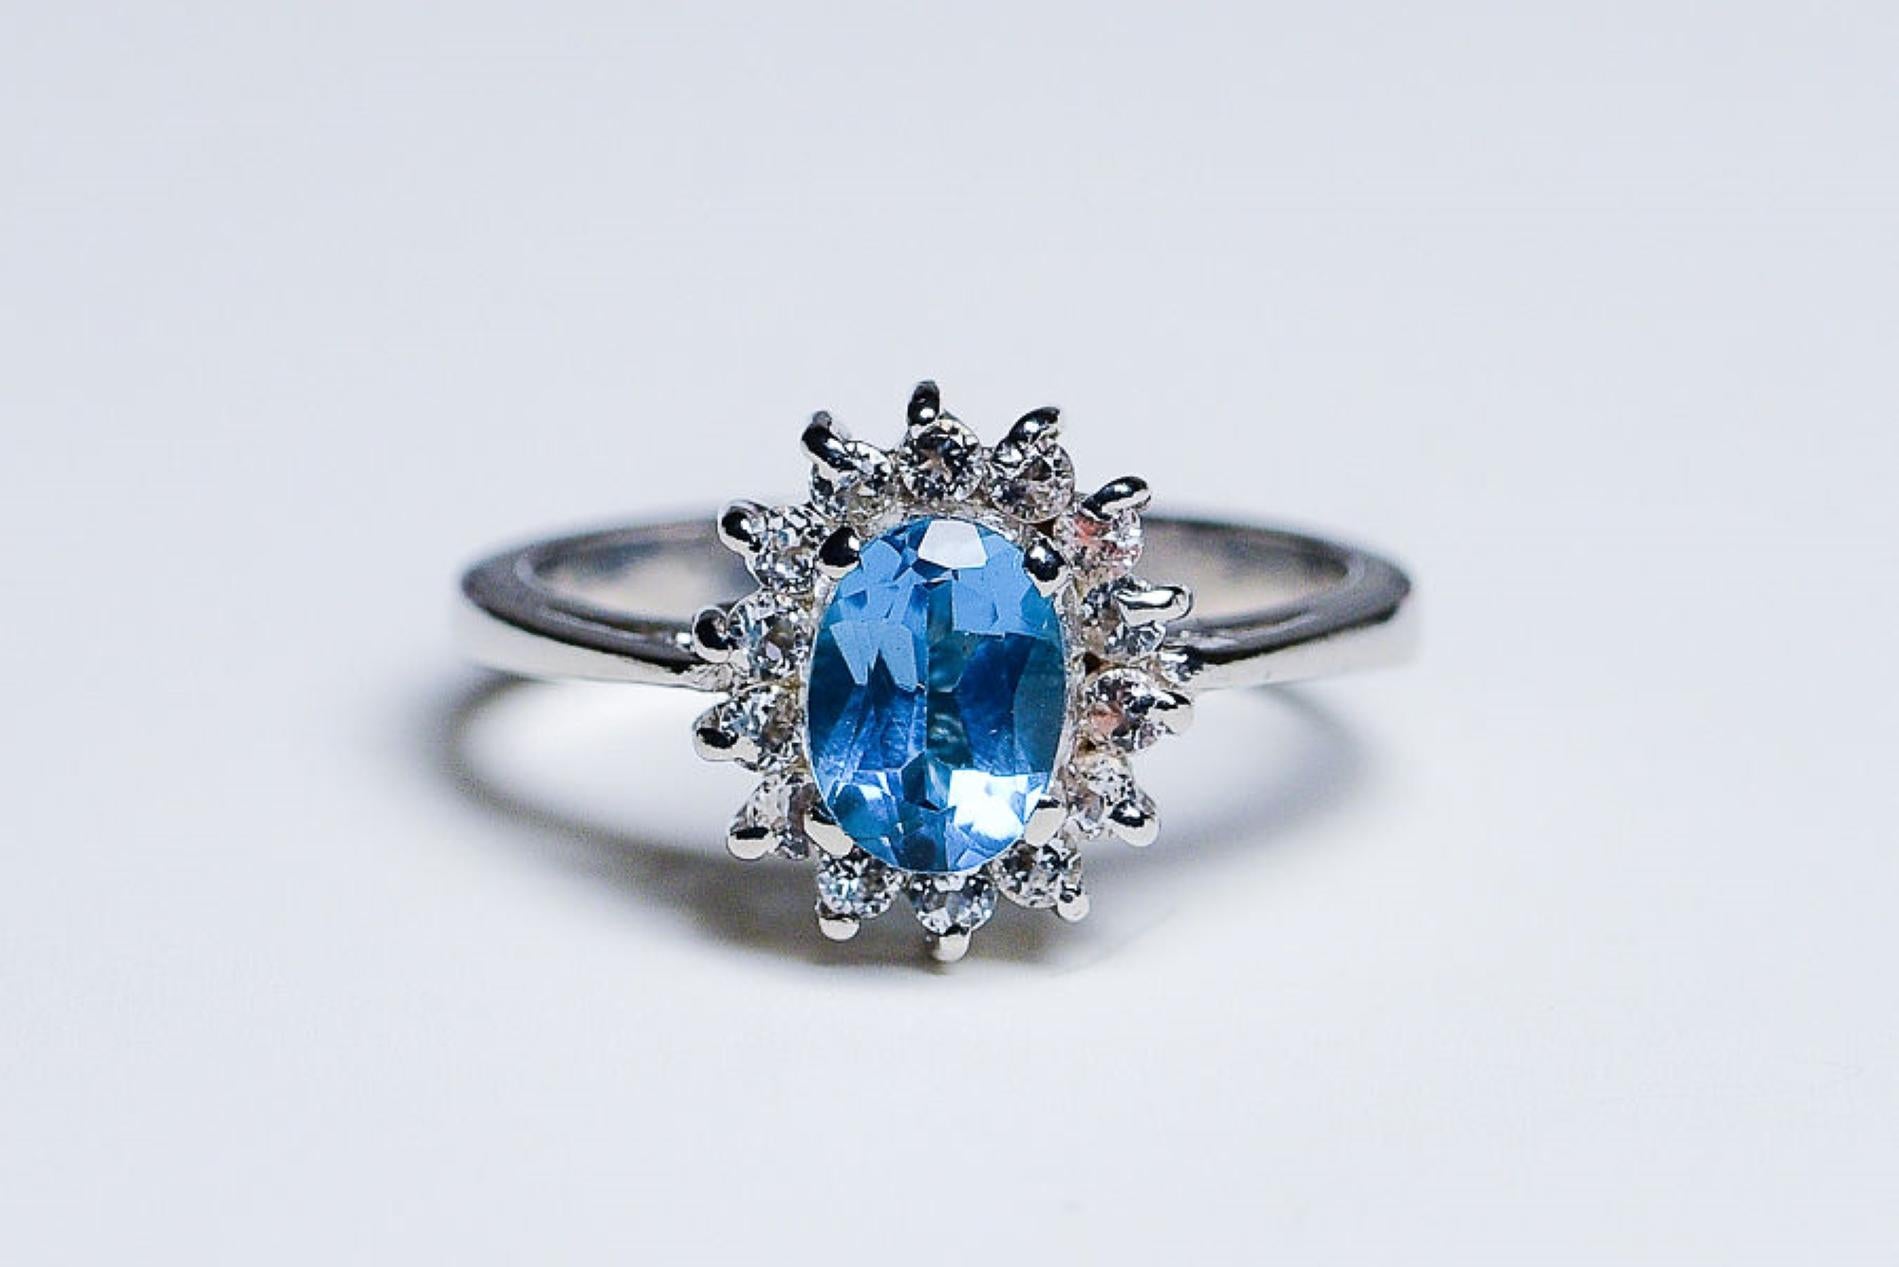 Presenting our 1.5ct Oval Topaz Platinum Silver Ring, a stunning piece that exudes elegance and sophistication. This ring features a mesmerizing 1.5ct Oval Topaz at its center, known for its captivating blue hue and exceptional clarity.

The Topaz